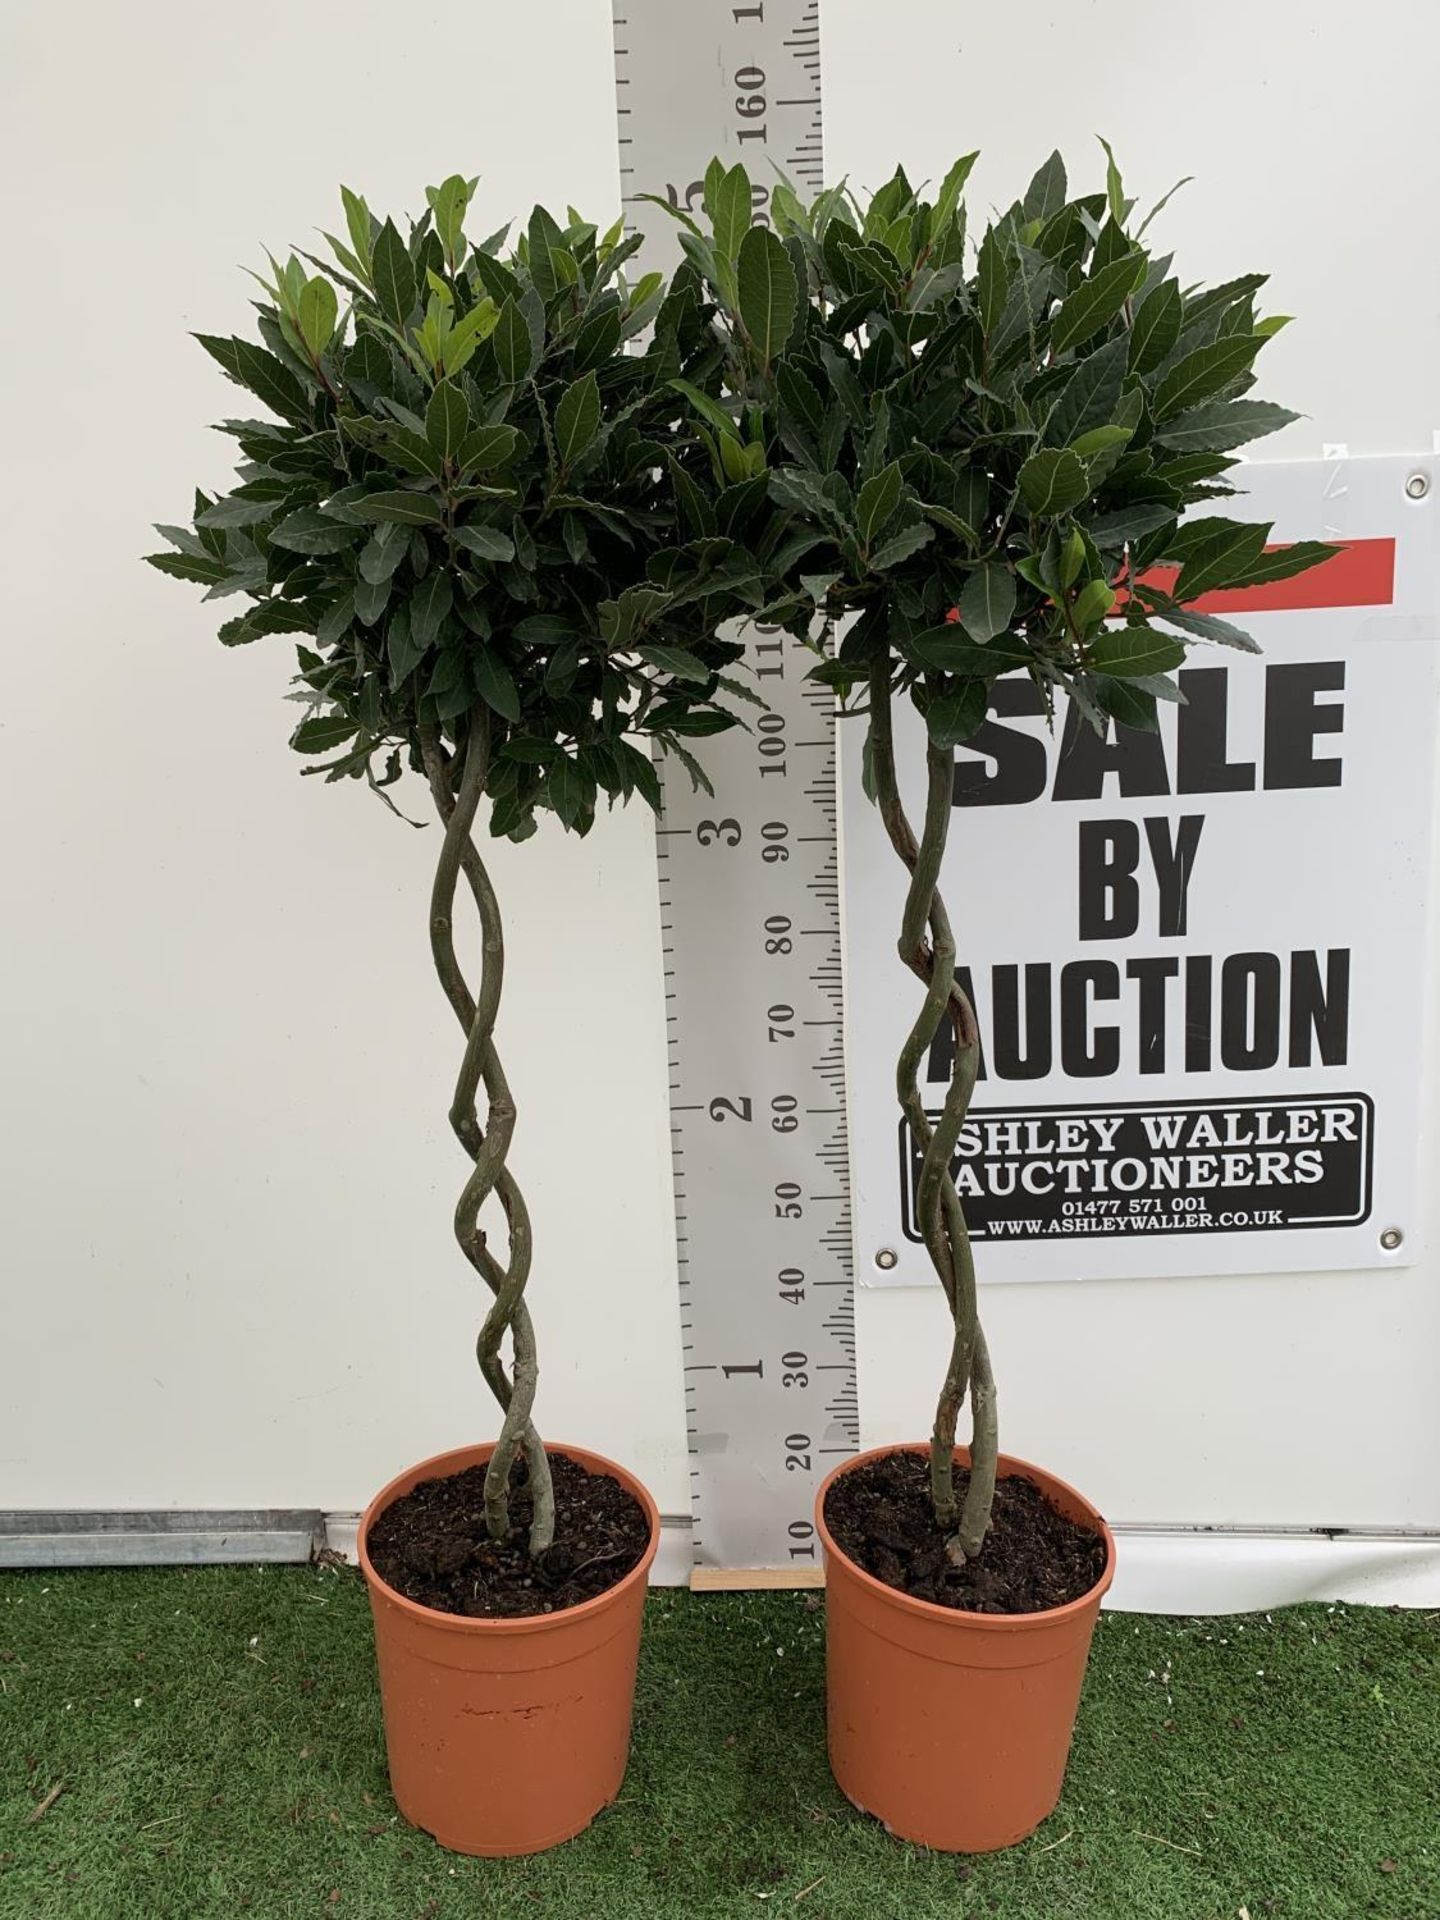 TWO DOUBLE SPIRAL LAURUS BAY TREES APPROX 150CM IN HEIGHT IN 7.5 LTR POTS PLUS VAT TO BE SOLD FOR - Image 8 of 16